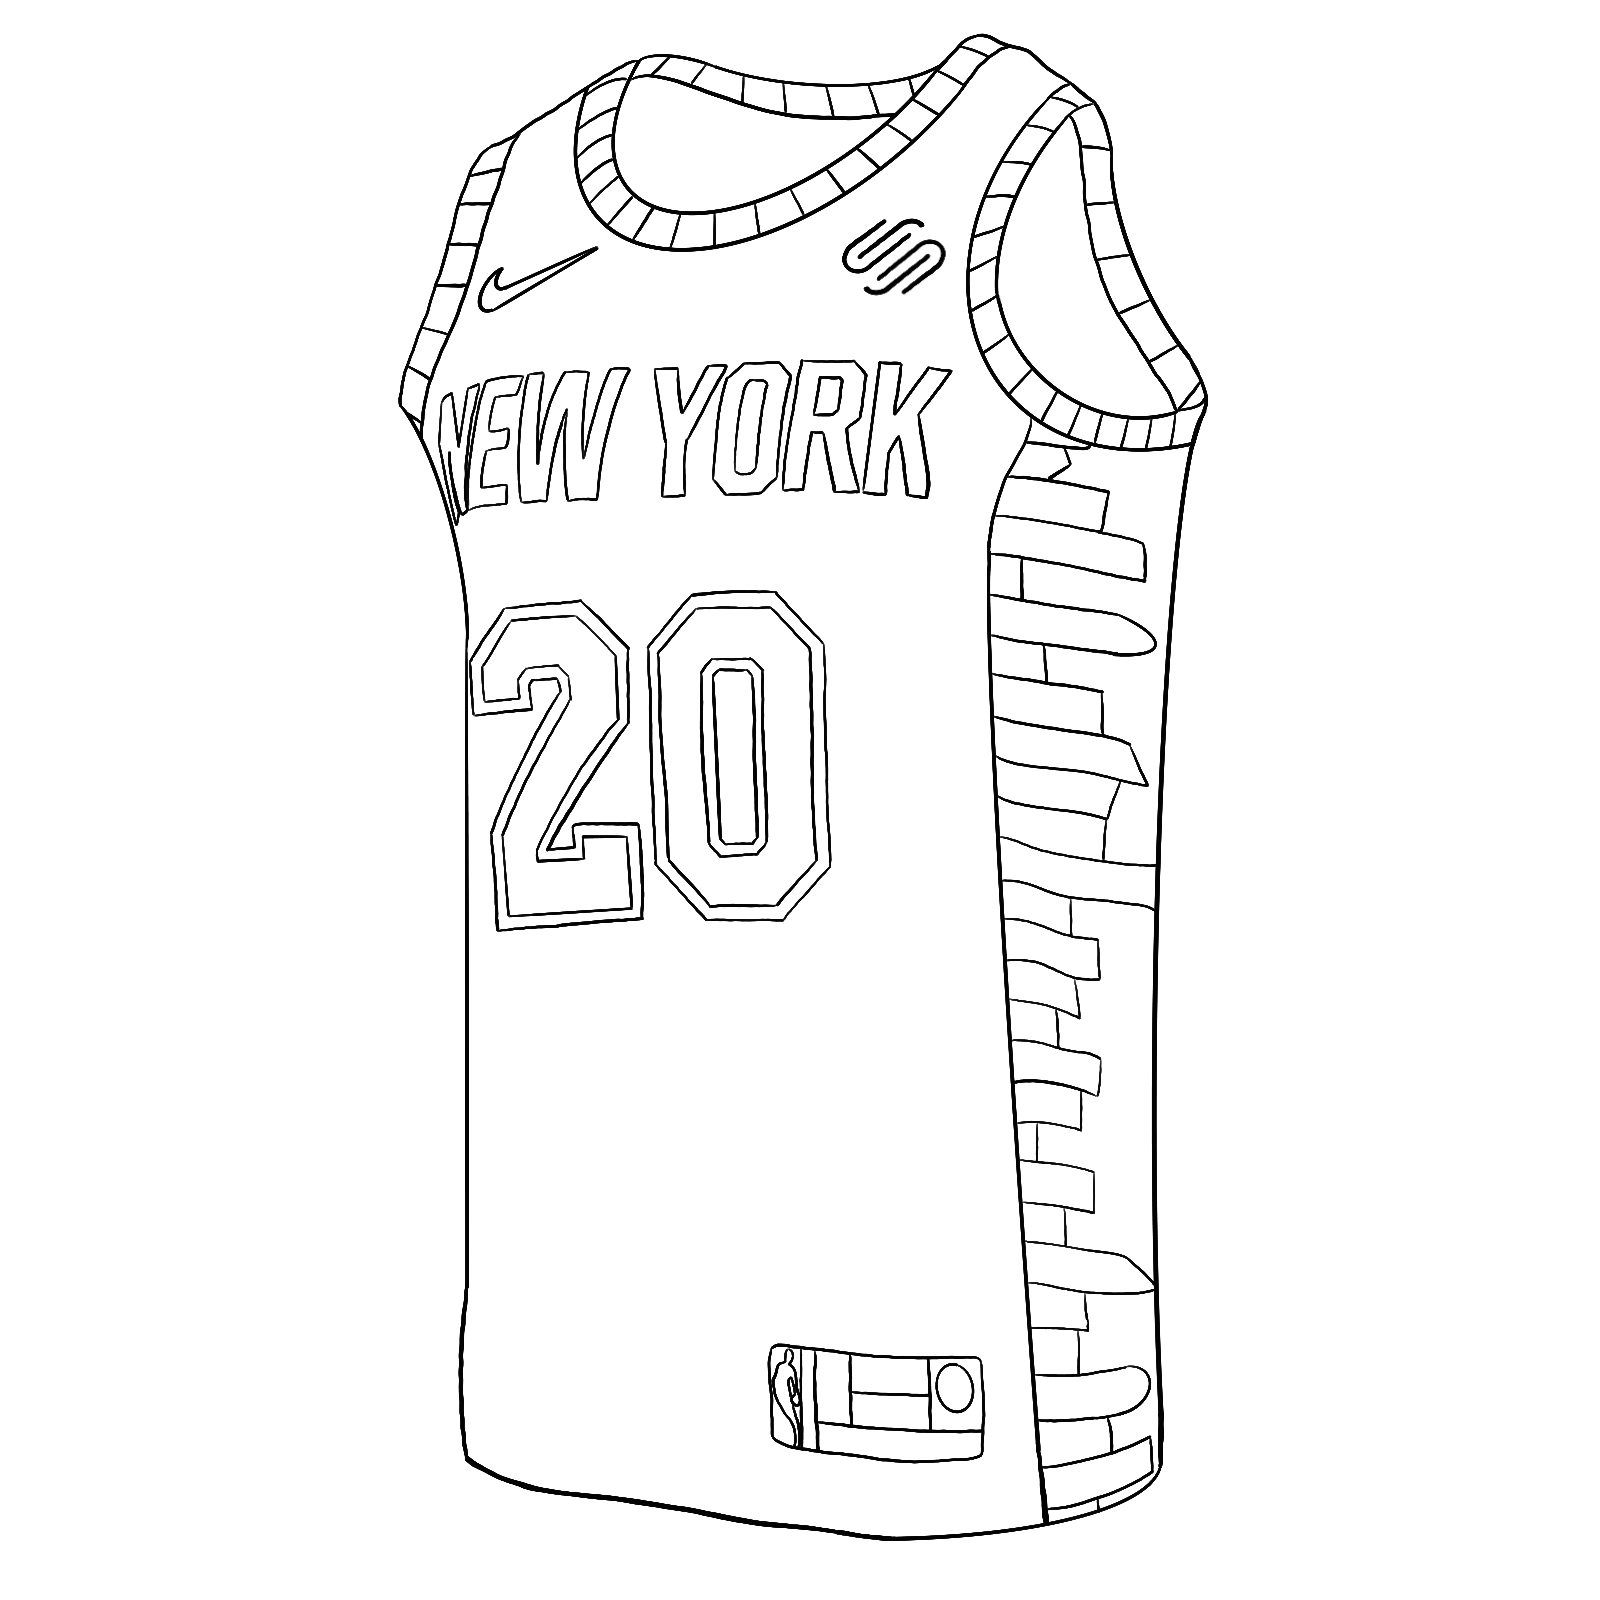 Knicks: Coloring Pages | Garden of Dreams Foundation